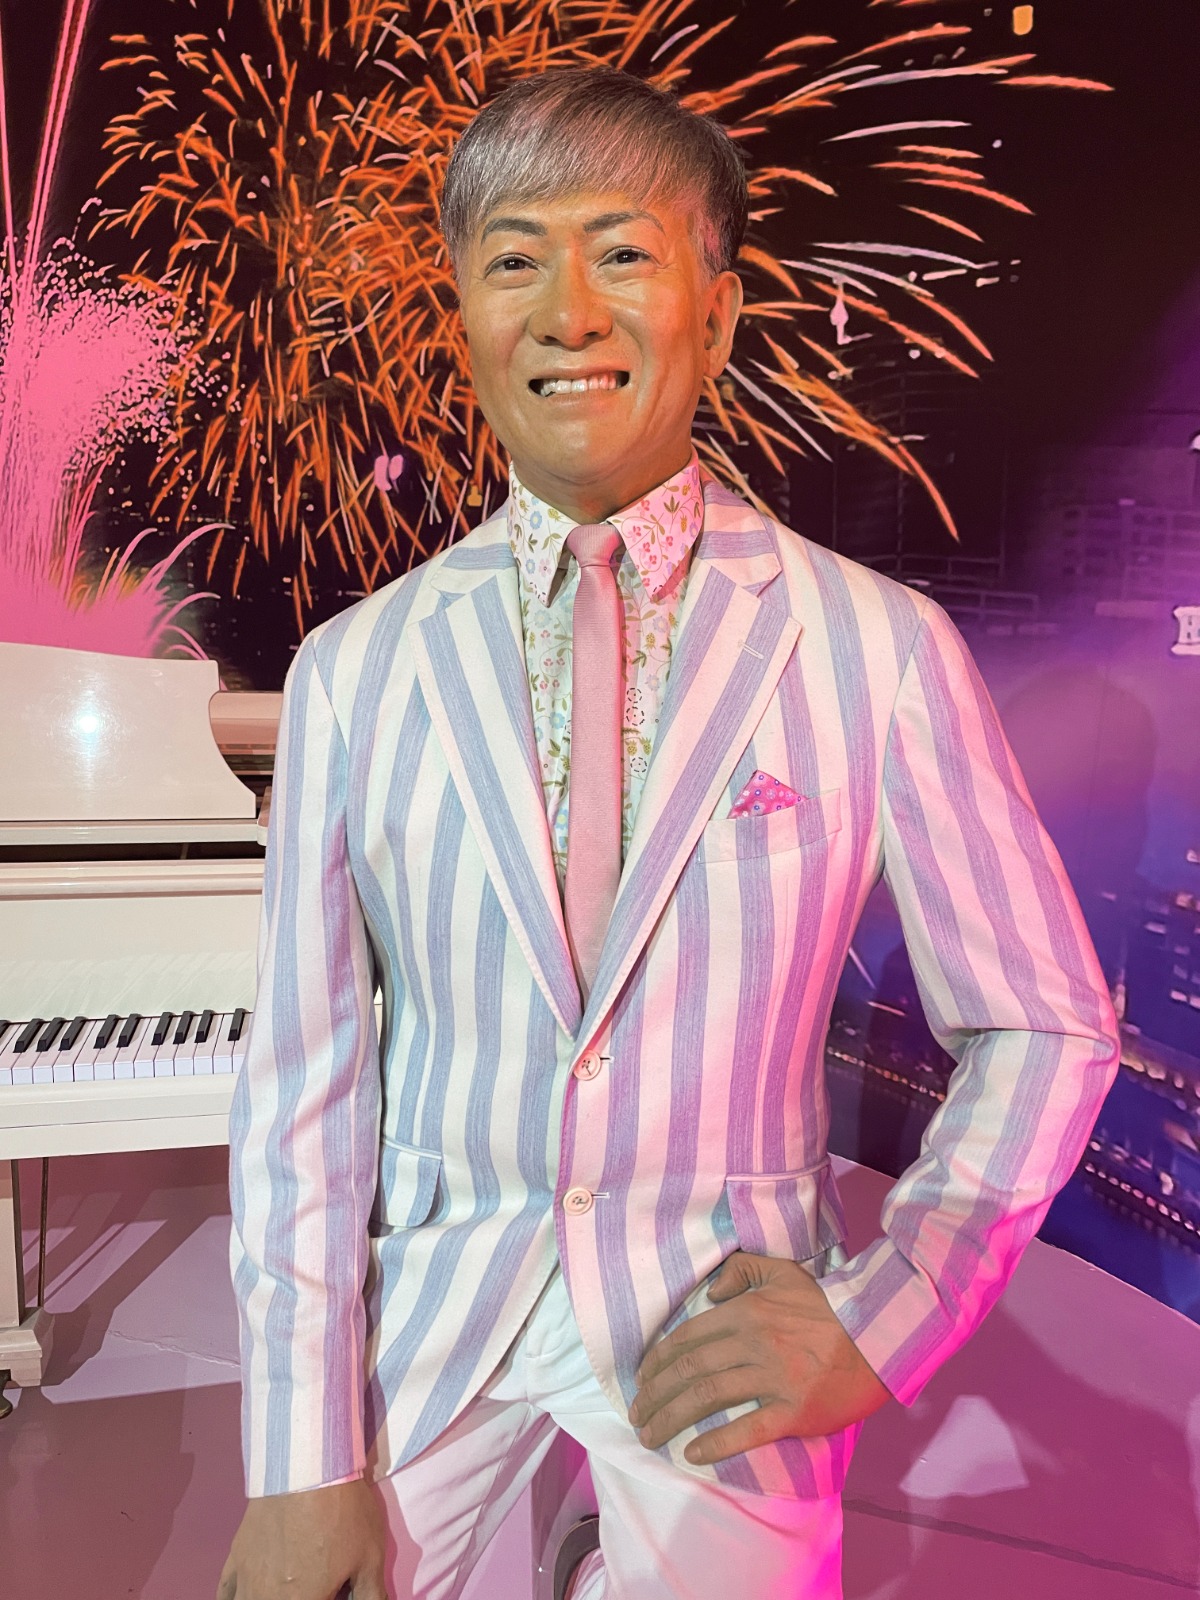 Dick Lee's Wax Figure in Madame Tussauds Singapore